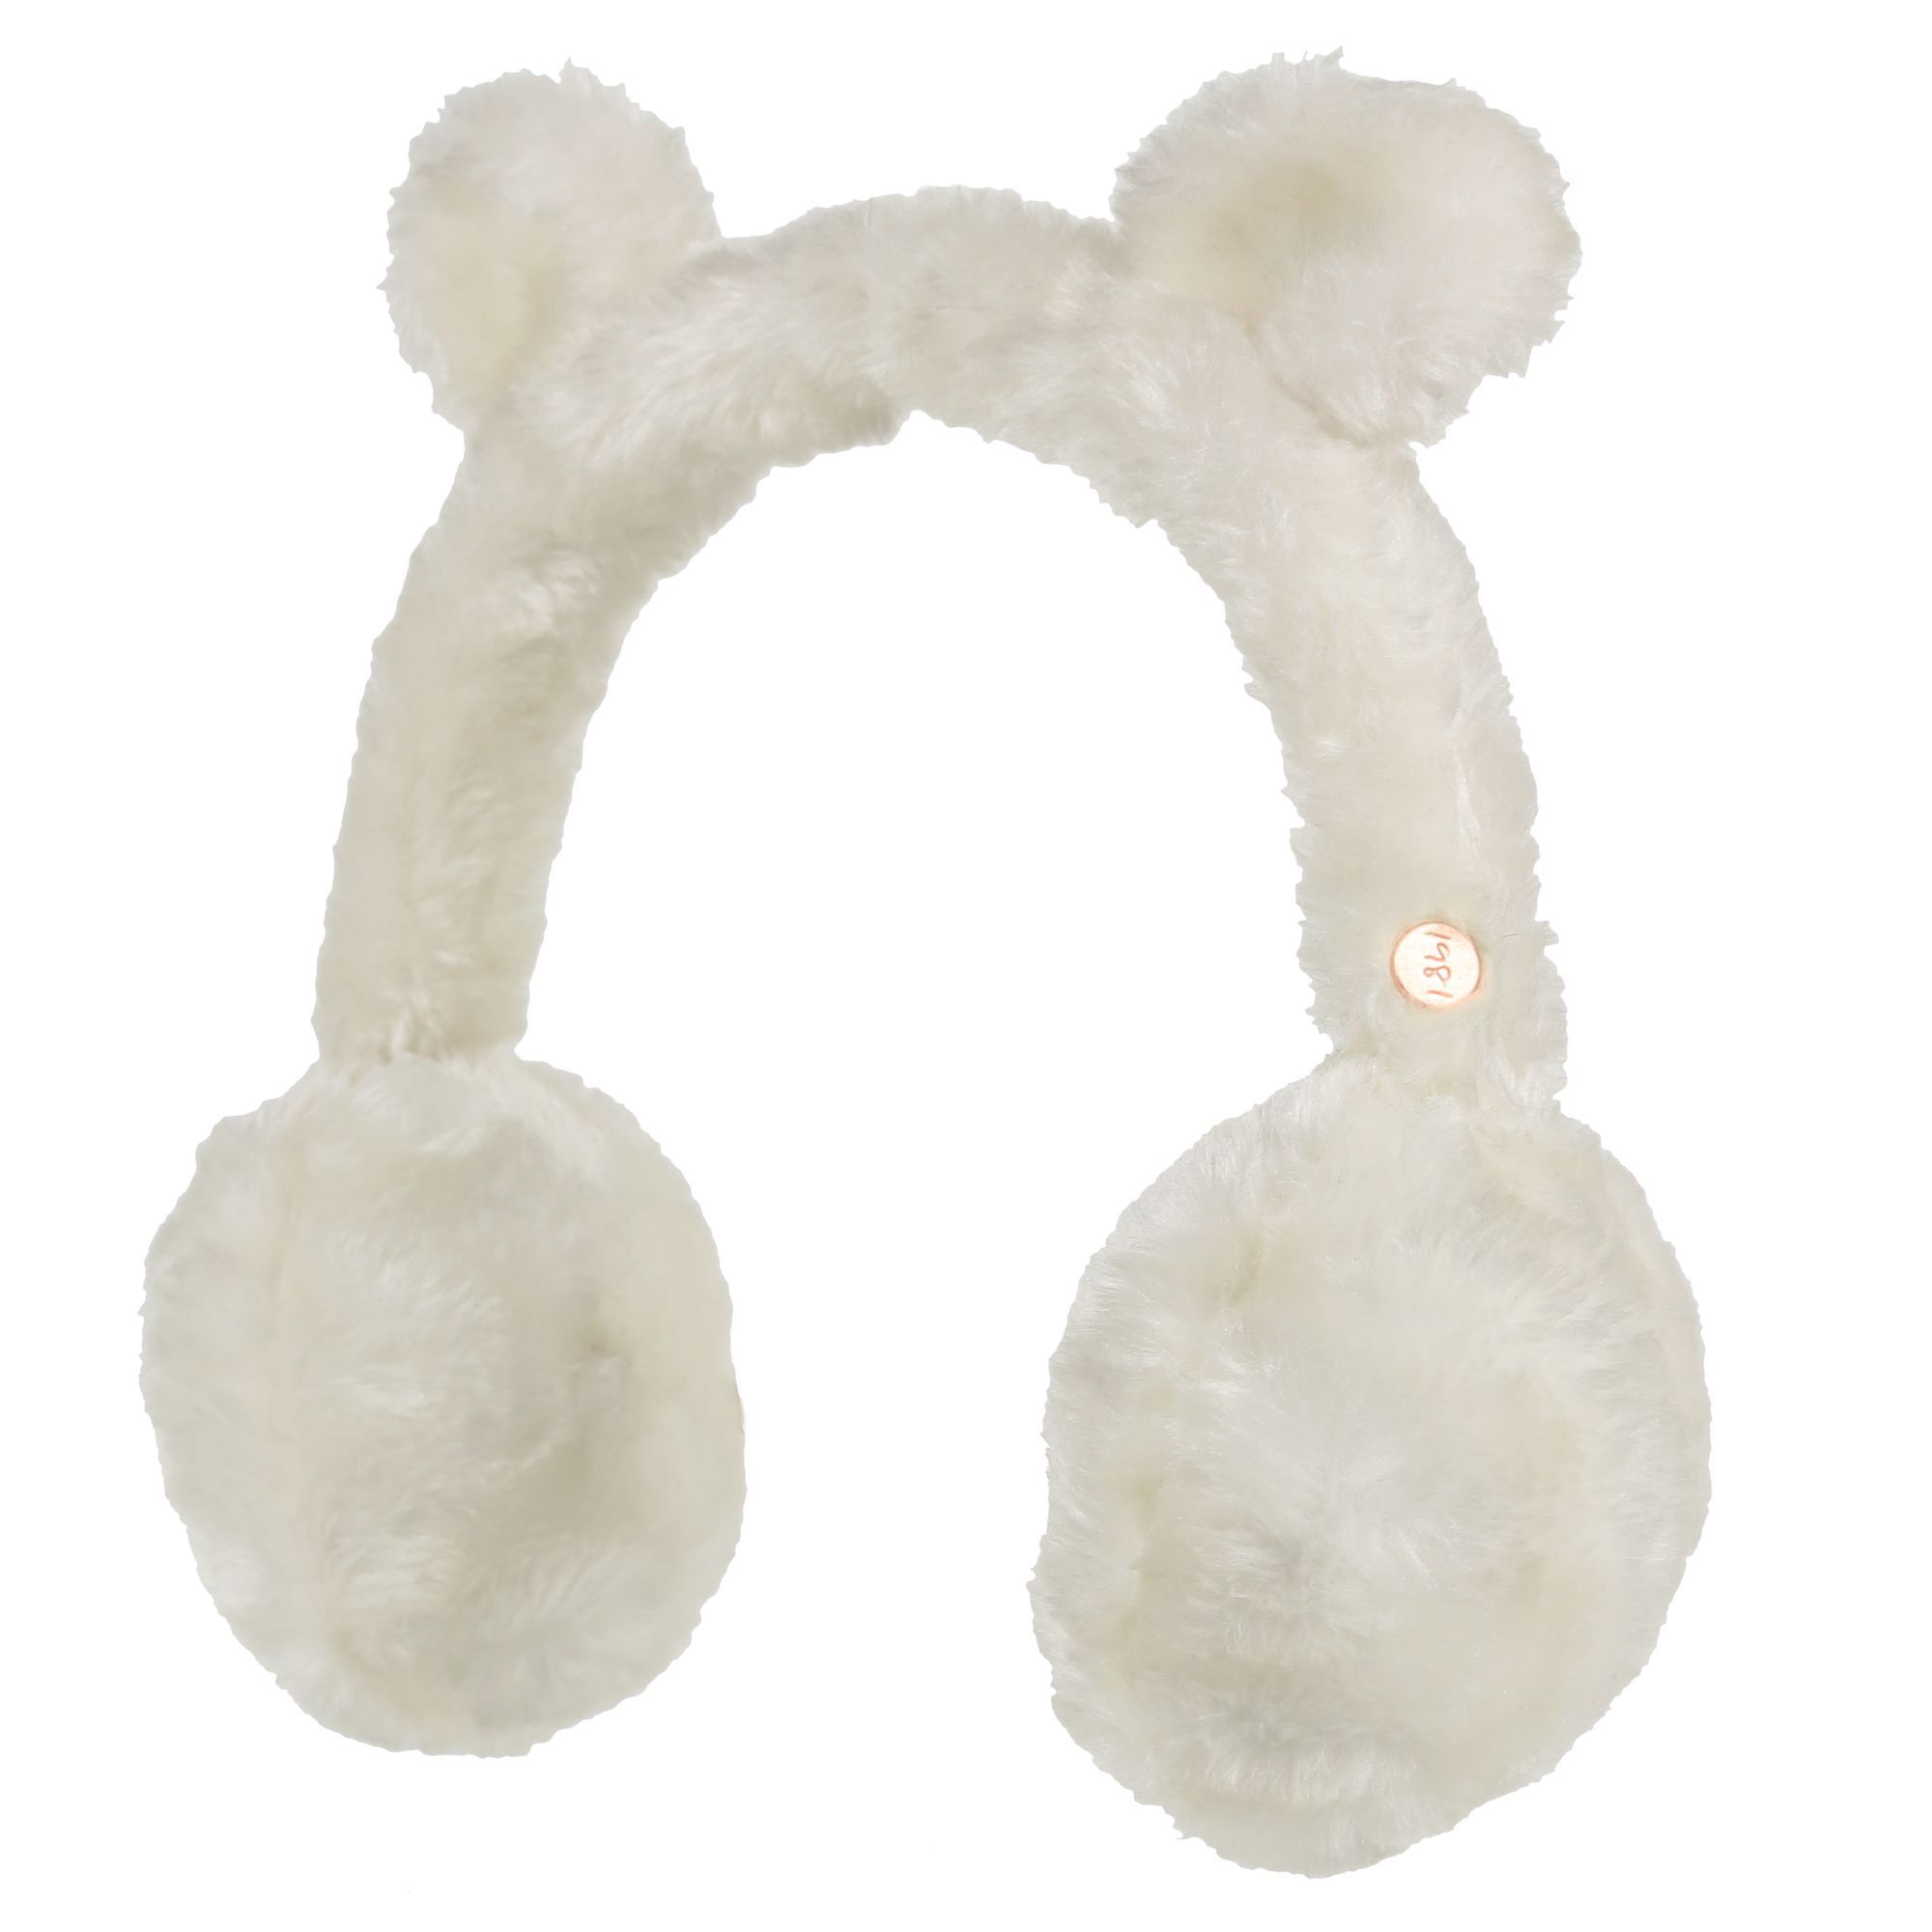 The Regatta Girls Ezora Ear Muffs feature fluffy character animal ears. The ear muffs feature faux fur large pom-poms. Made of 100% polyester fluffy short pile fleece.